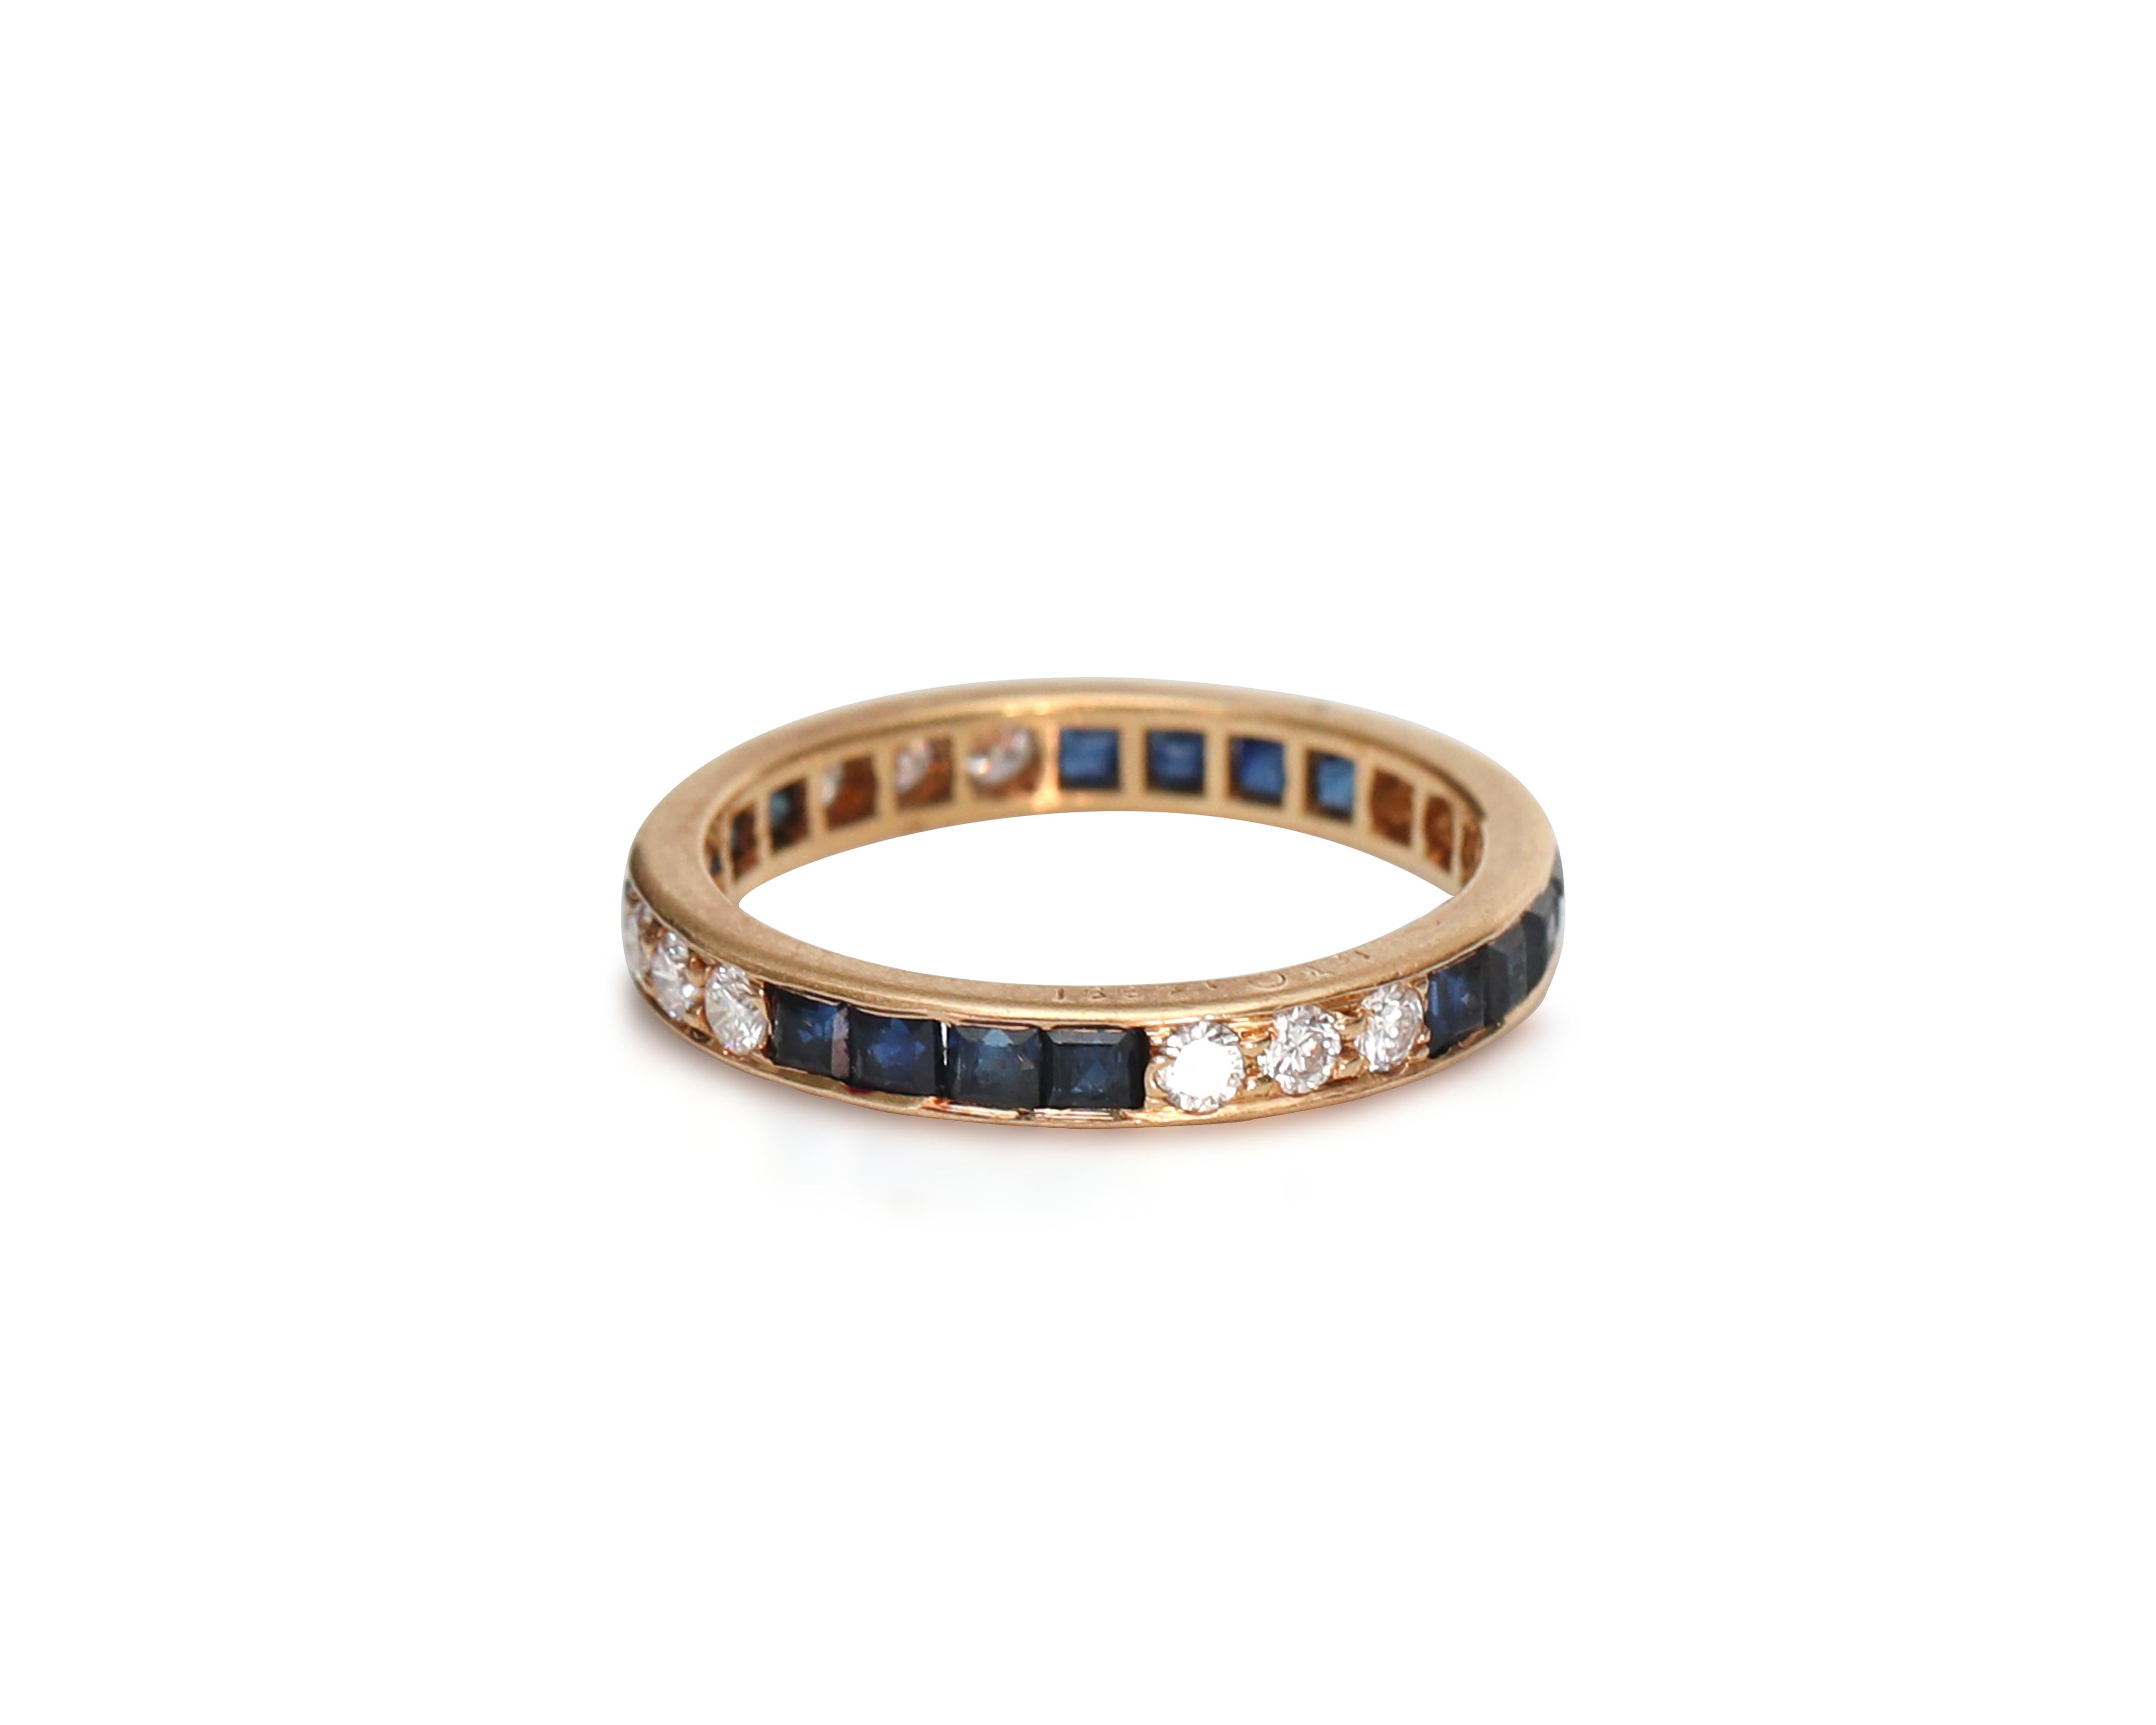 This piece is a genuine 1950s era Orcar Heyman Art Deco style eternity band featuring a stylish pattern of alternating sections of diamond and blue sapphires set crafted of 18 karat gold! There is a pierced open back pattern throughout the ring to